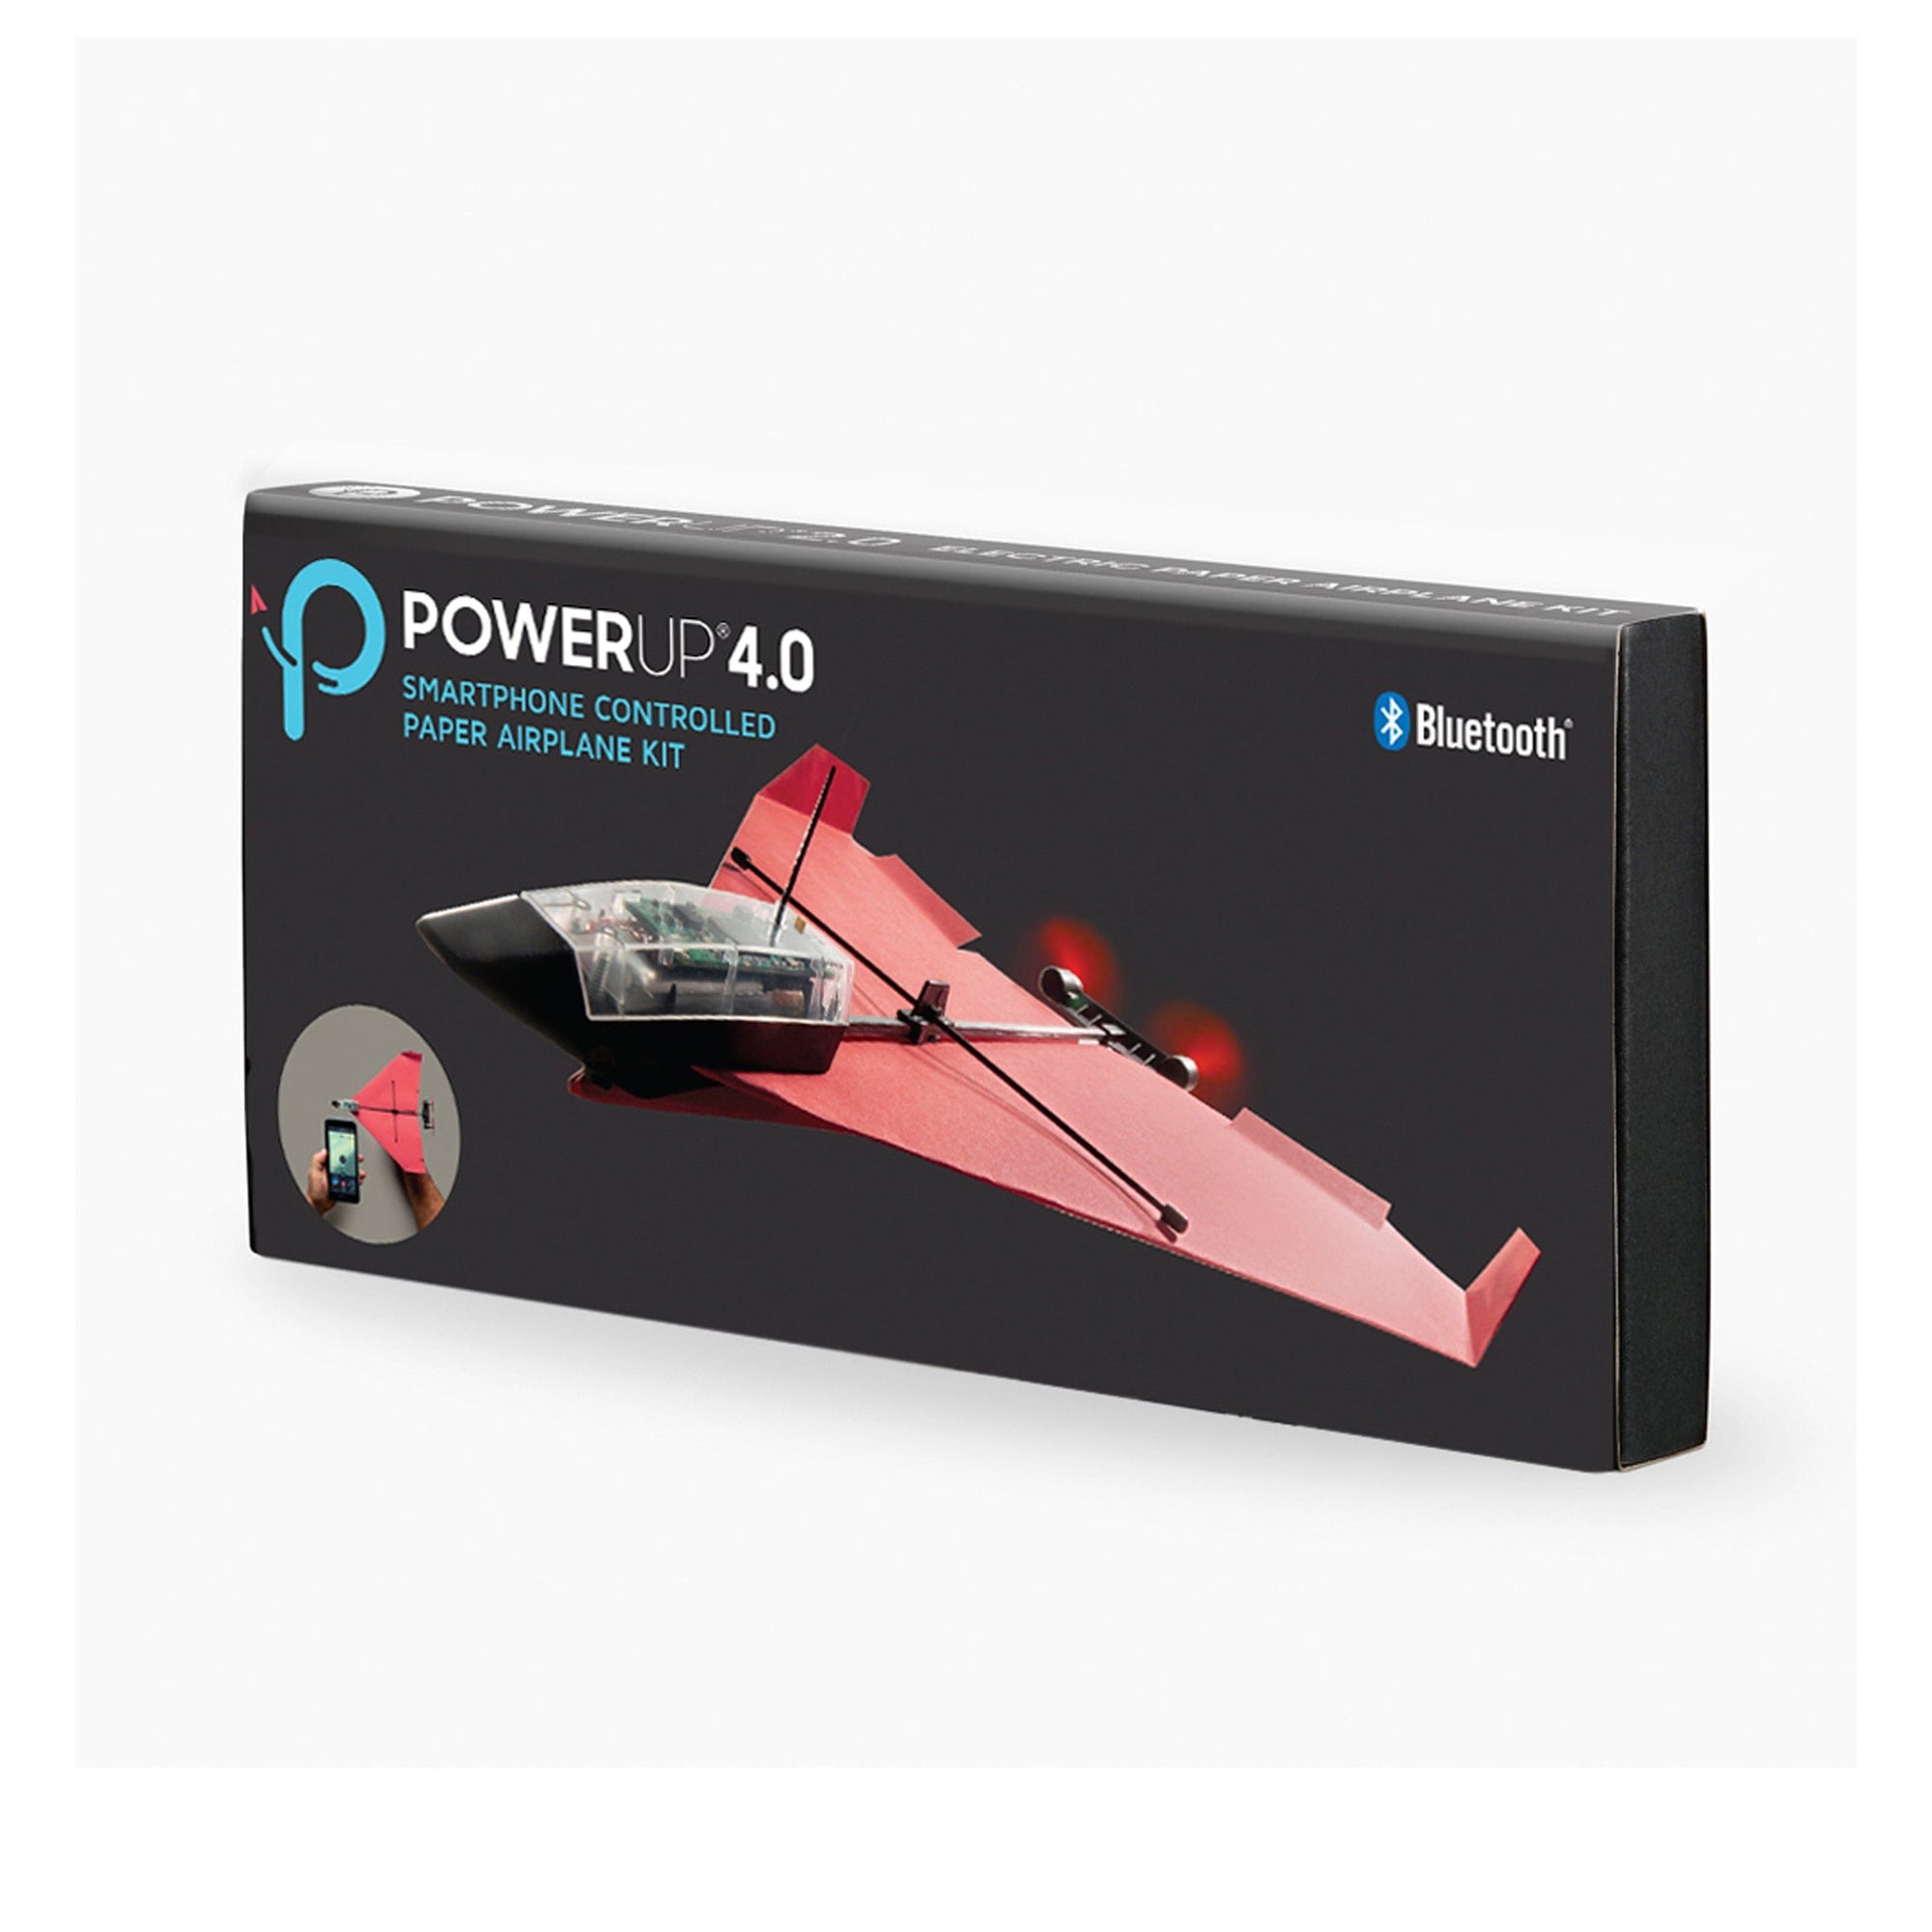 PowerUp 4.0: The Ultimate Bundle - Explore Entry Level RC Airplanes Using Sheet Foam & Balsa Wood. PowerUp 4.0, Paper Plane Model Book & Accessories